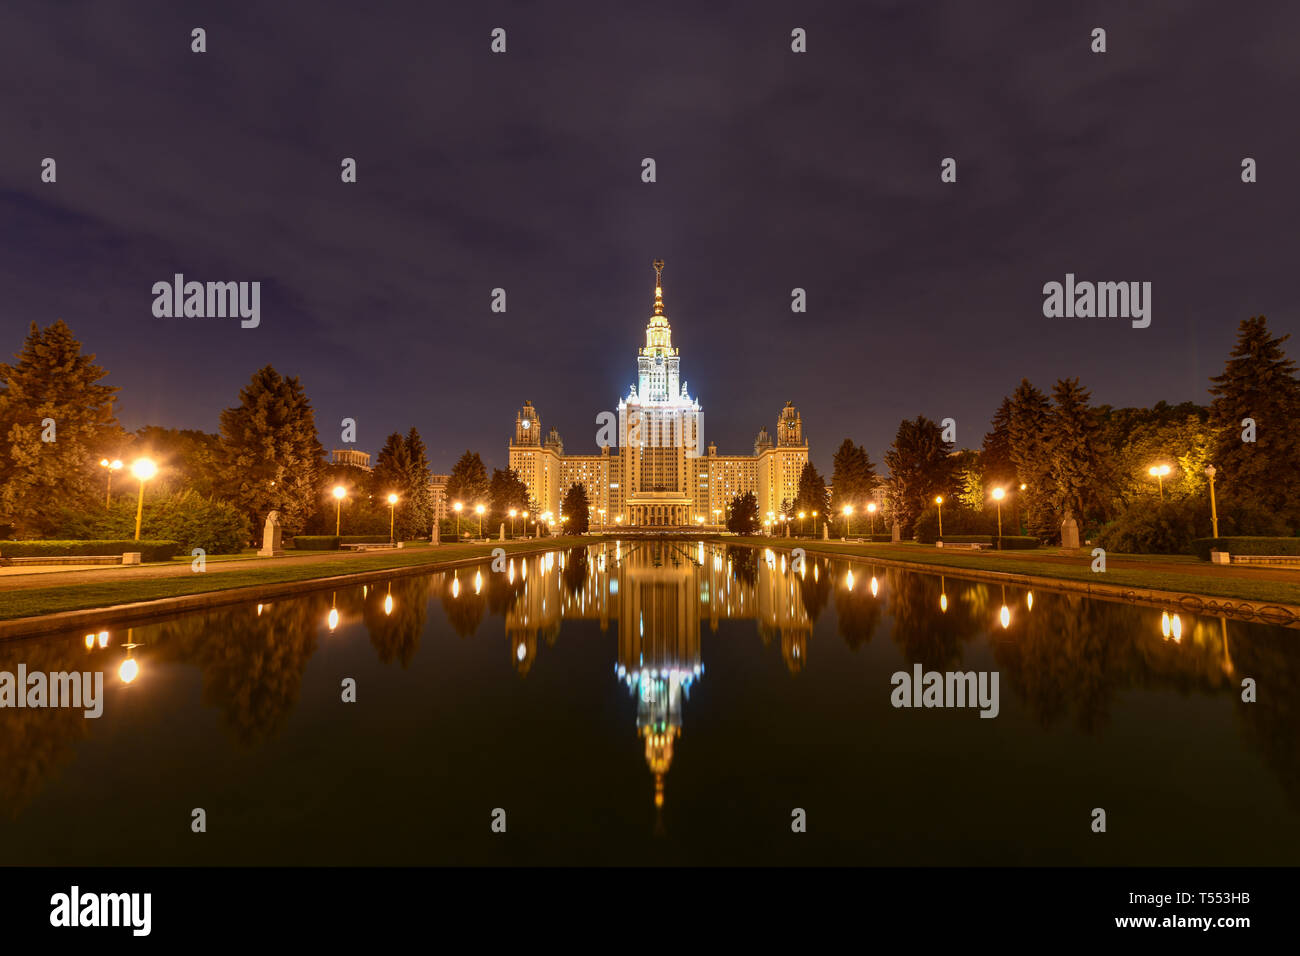 Night view of the Moscow State University in Russia. Moscow State University is a coeducational and public research university located in Moscow, Russ Stock Photo